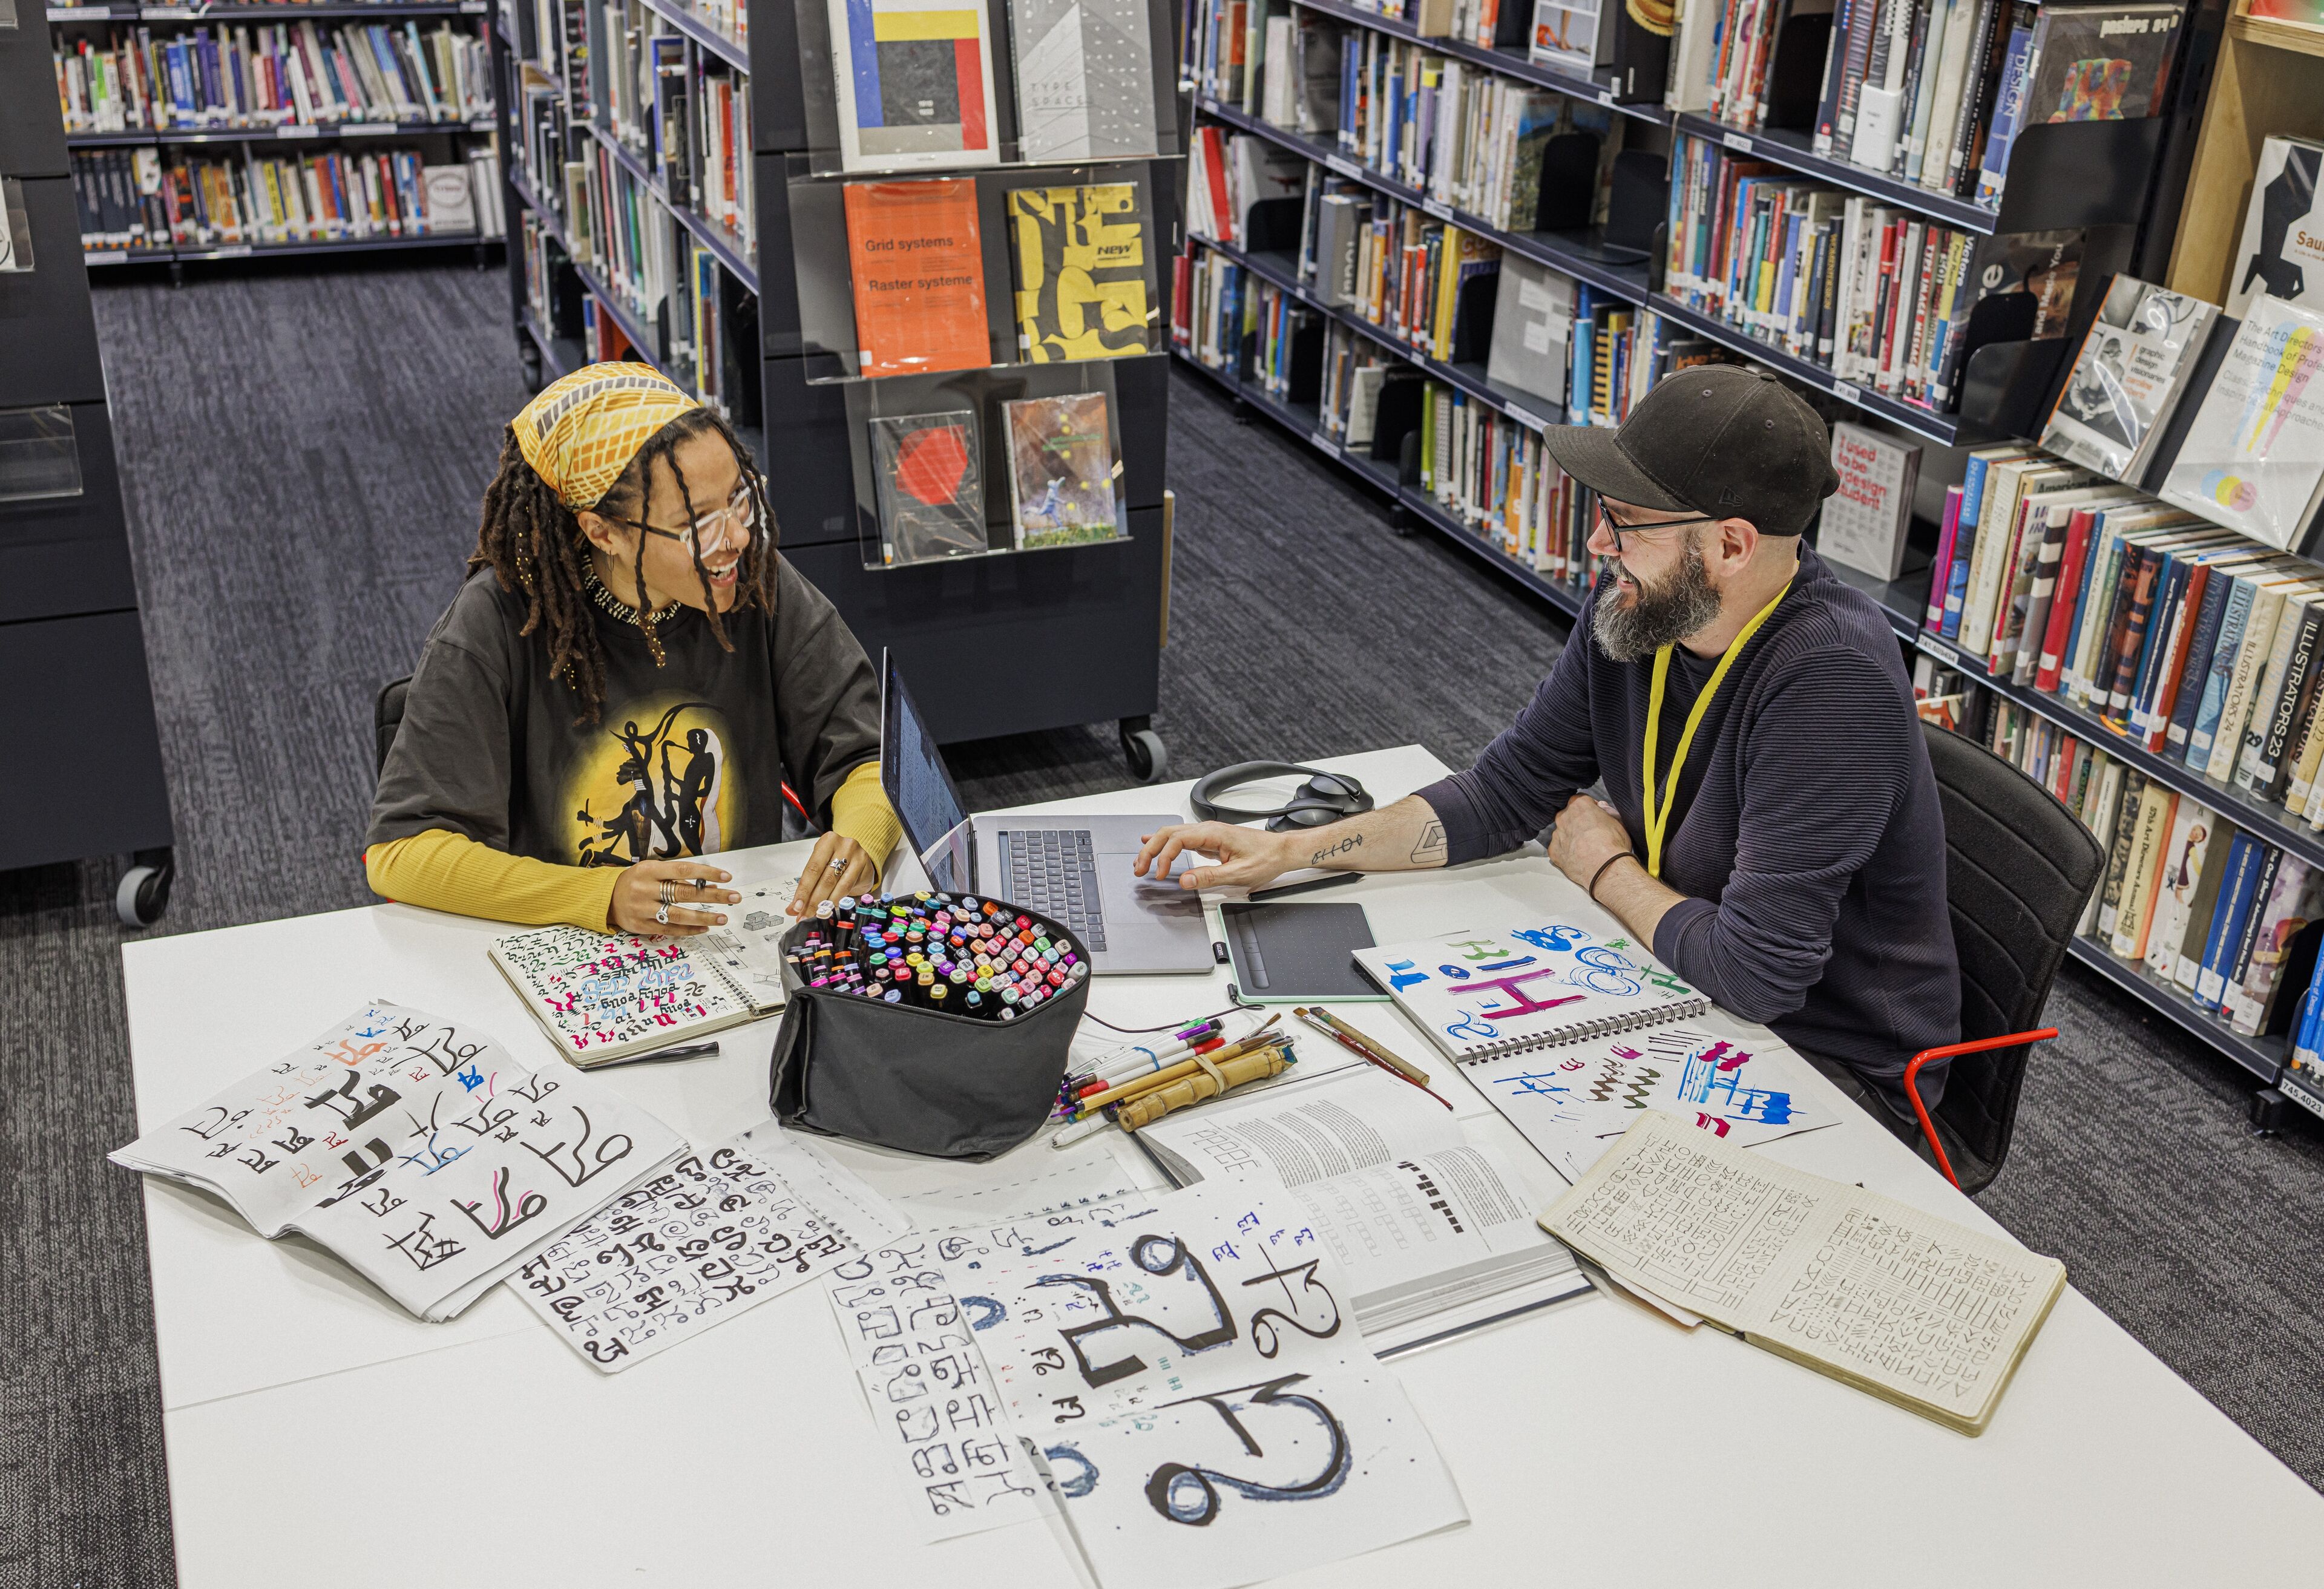 Two designers share a laugh over a table scattered with colorful markers and typography drafts in a well-stocked library.